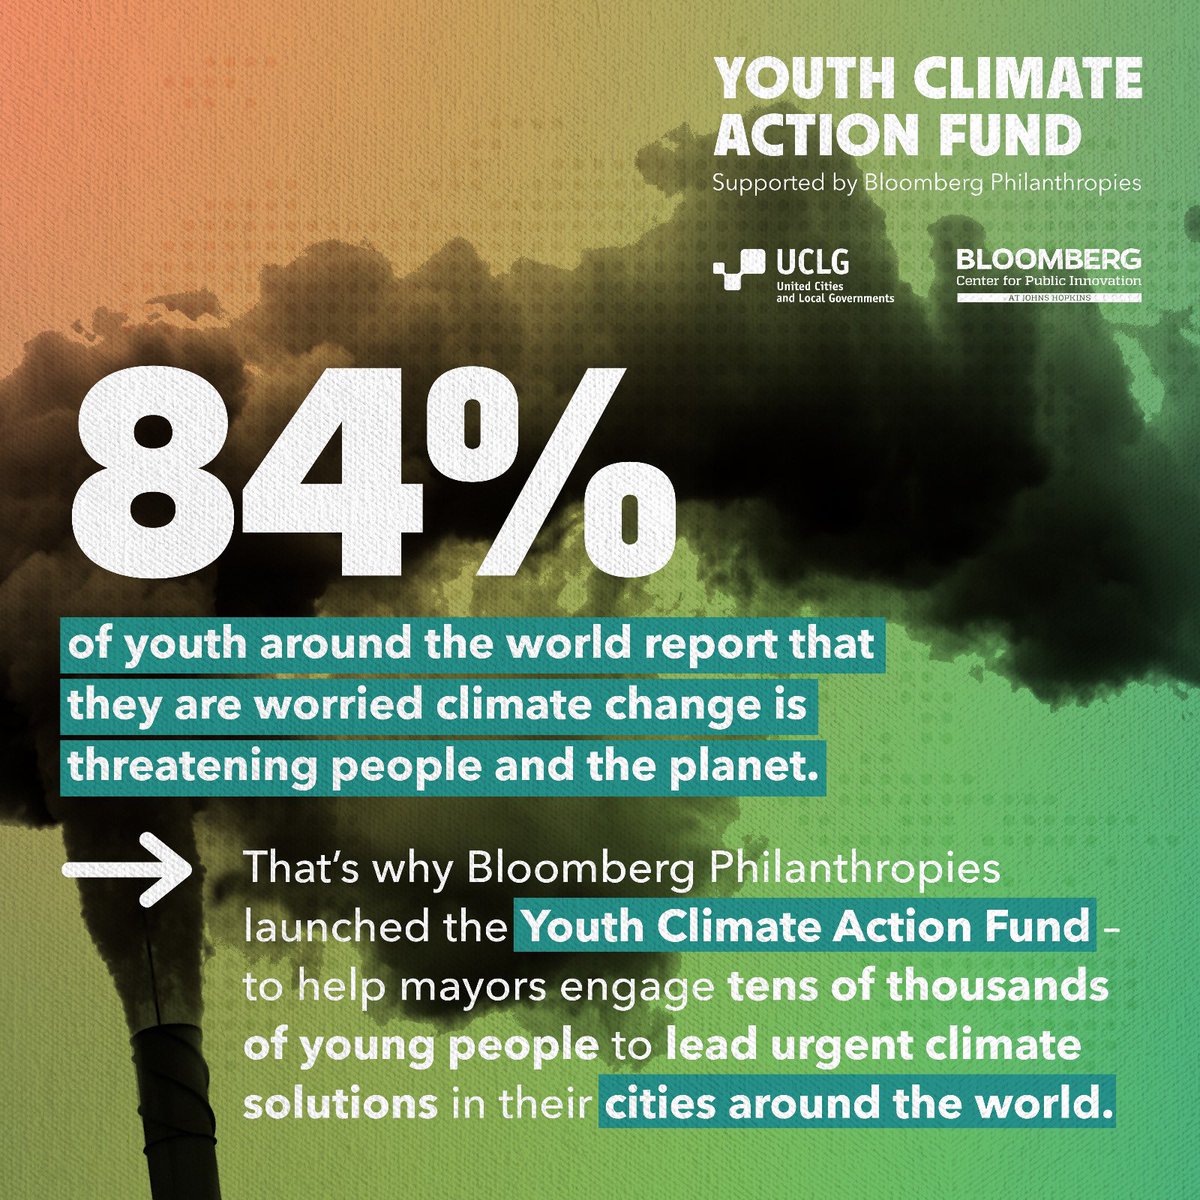 Local governments have played a critical role in climate mitigation and adaptation – and this work will only grow in the coming decade. The City of Bulawayo is excited to join @BloombergDotOrg’s new Youth Climate Action Fund, providing us with the investment and support from